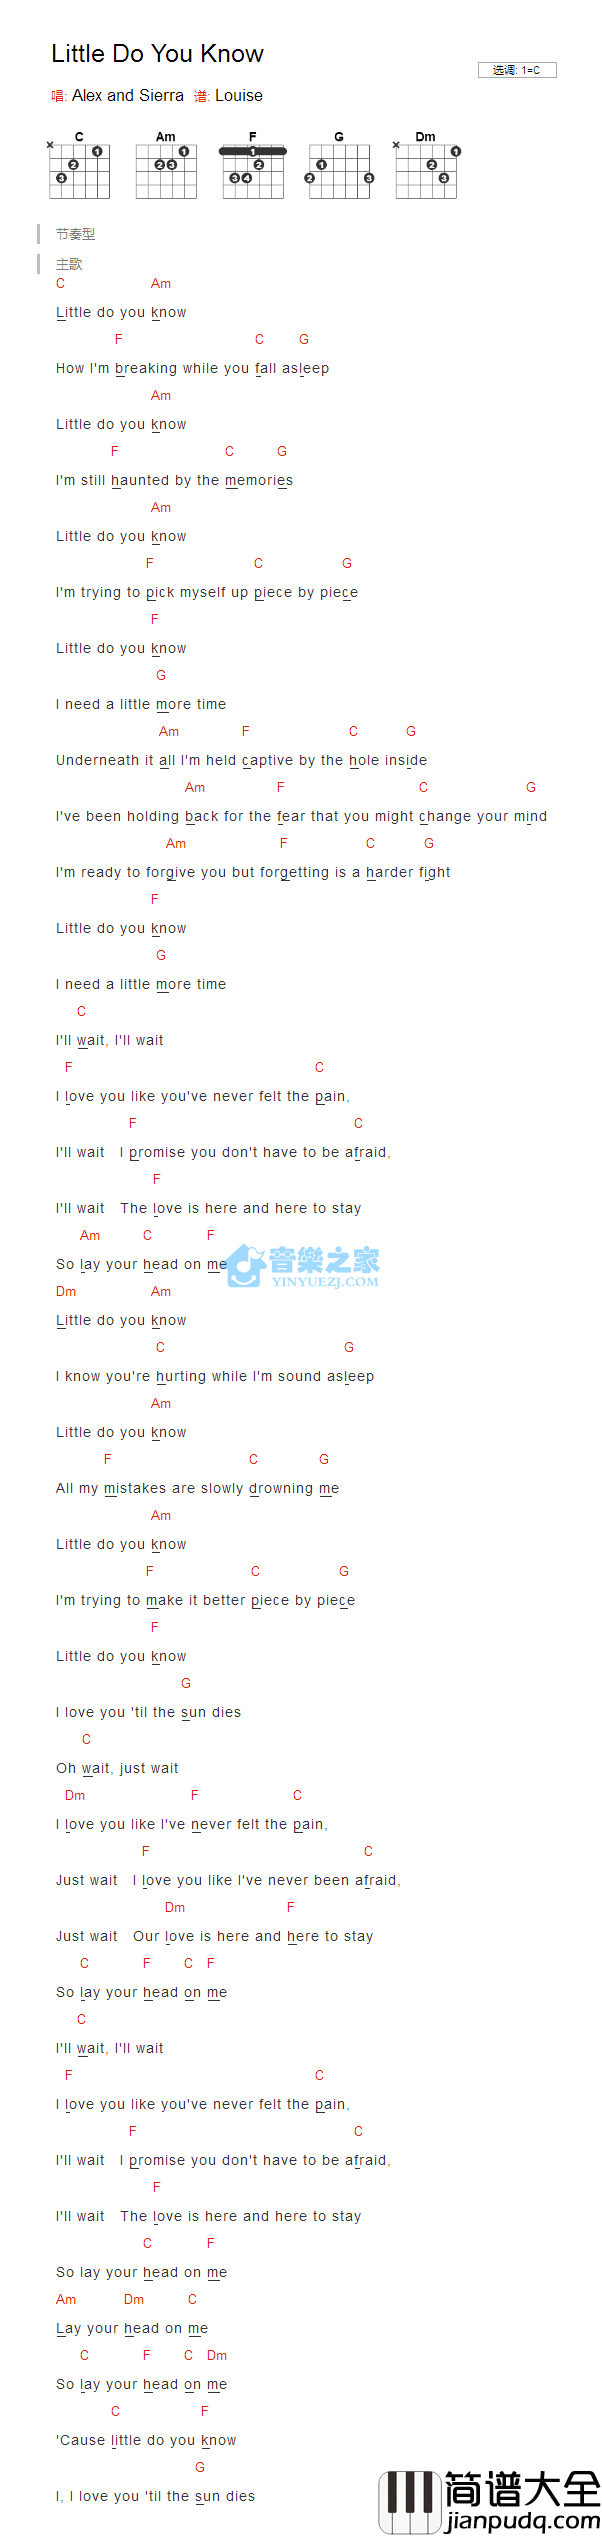 Little_Do_You_Know_吉他谱_C调版_Alex_and_Sierra